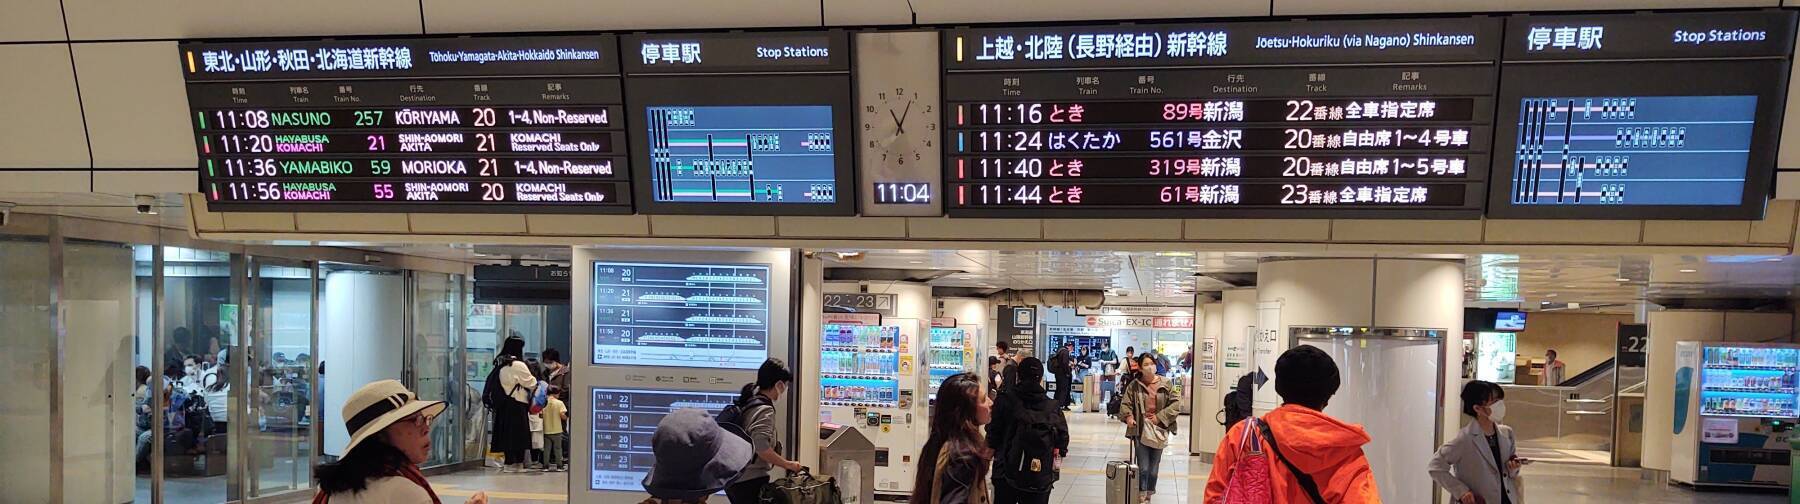 People below an overhead sign showing Shinkansen trains, departure times, and tracks.